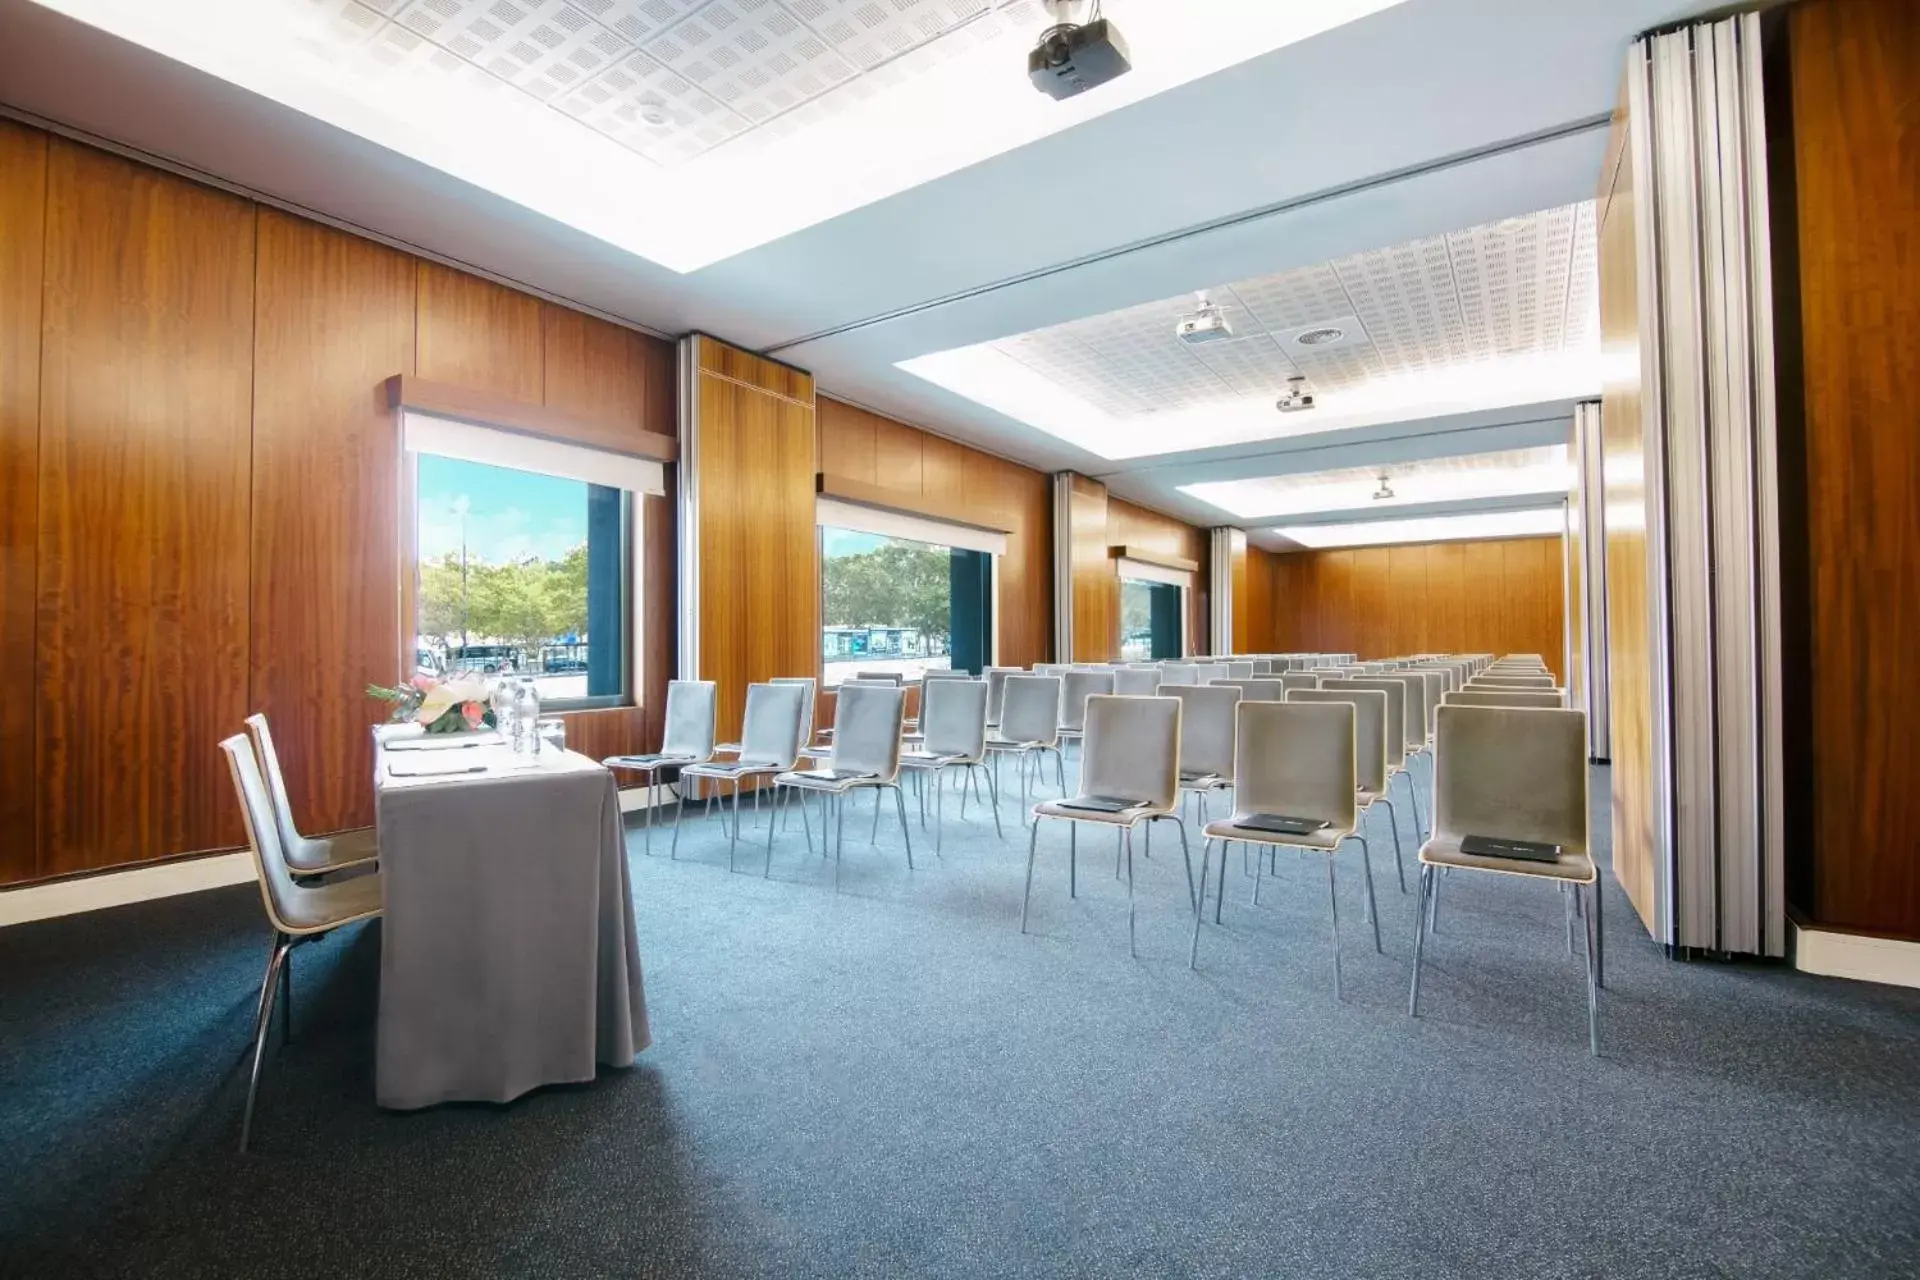 Meeting/conference room, Banquet Facilities in Hotel Acores Lisboa